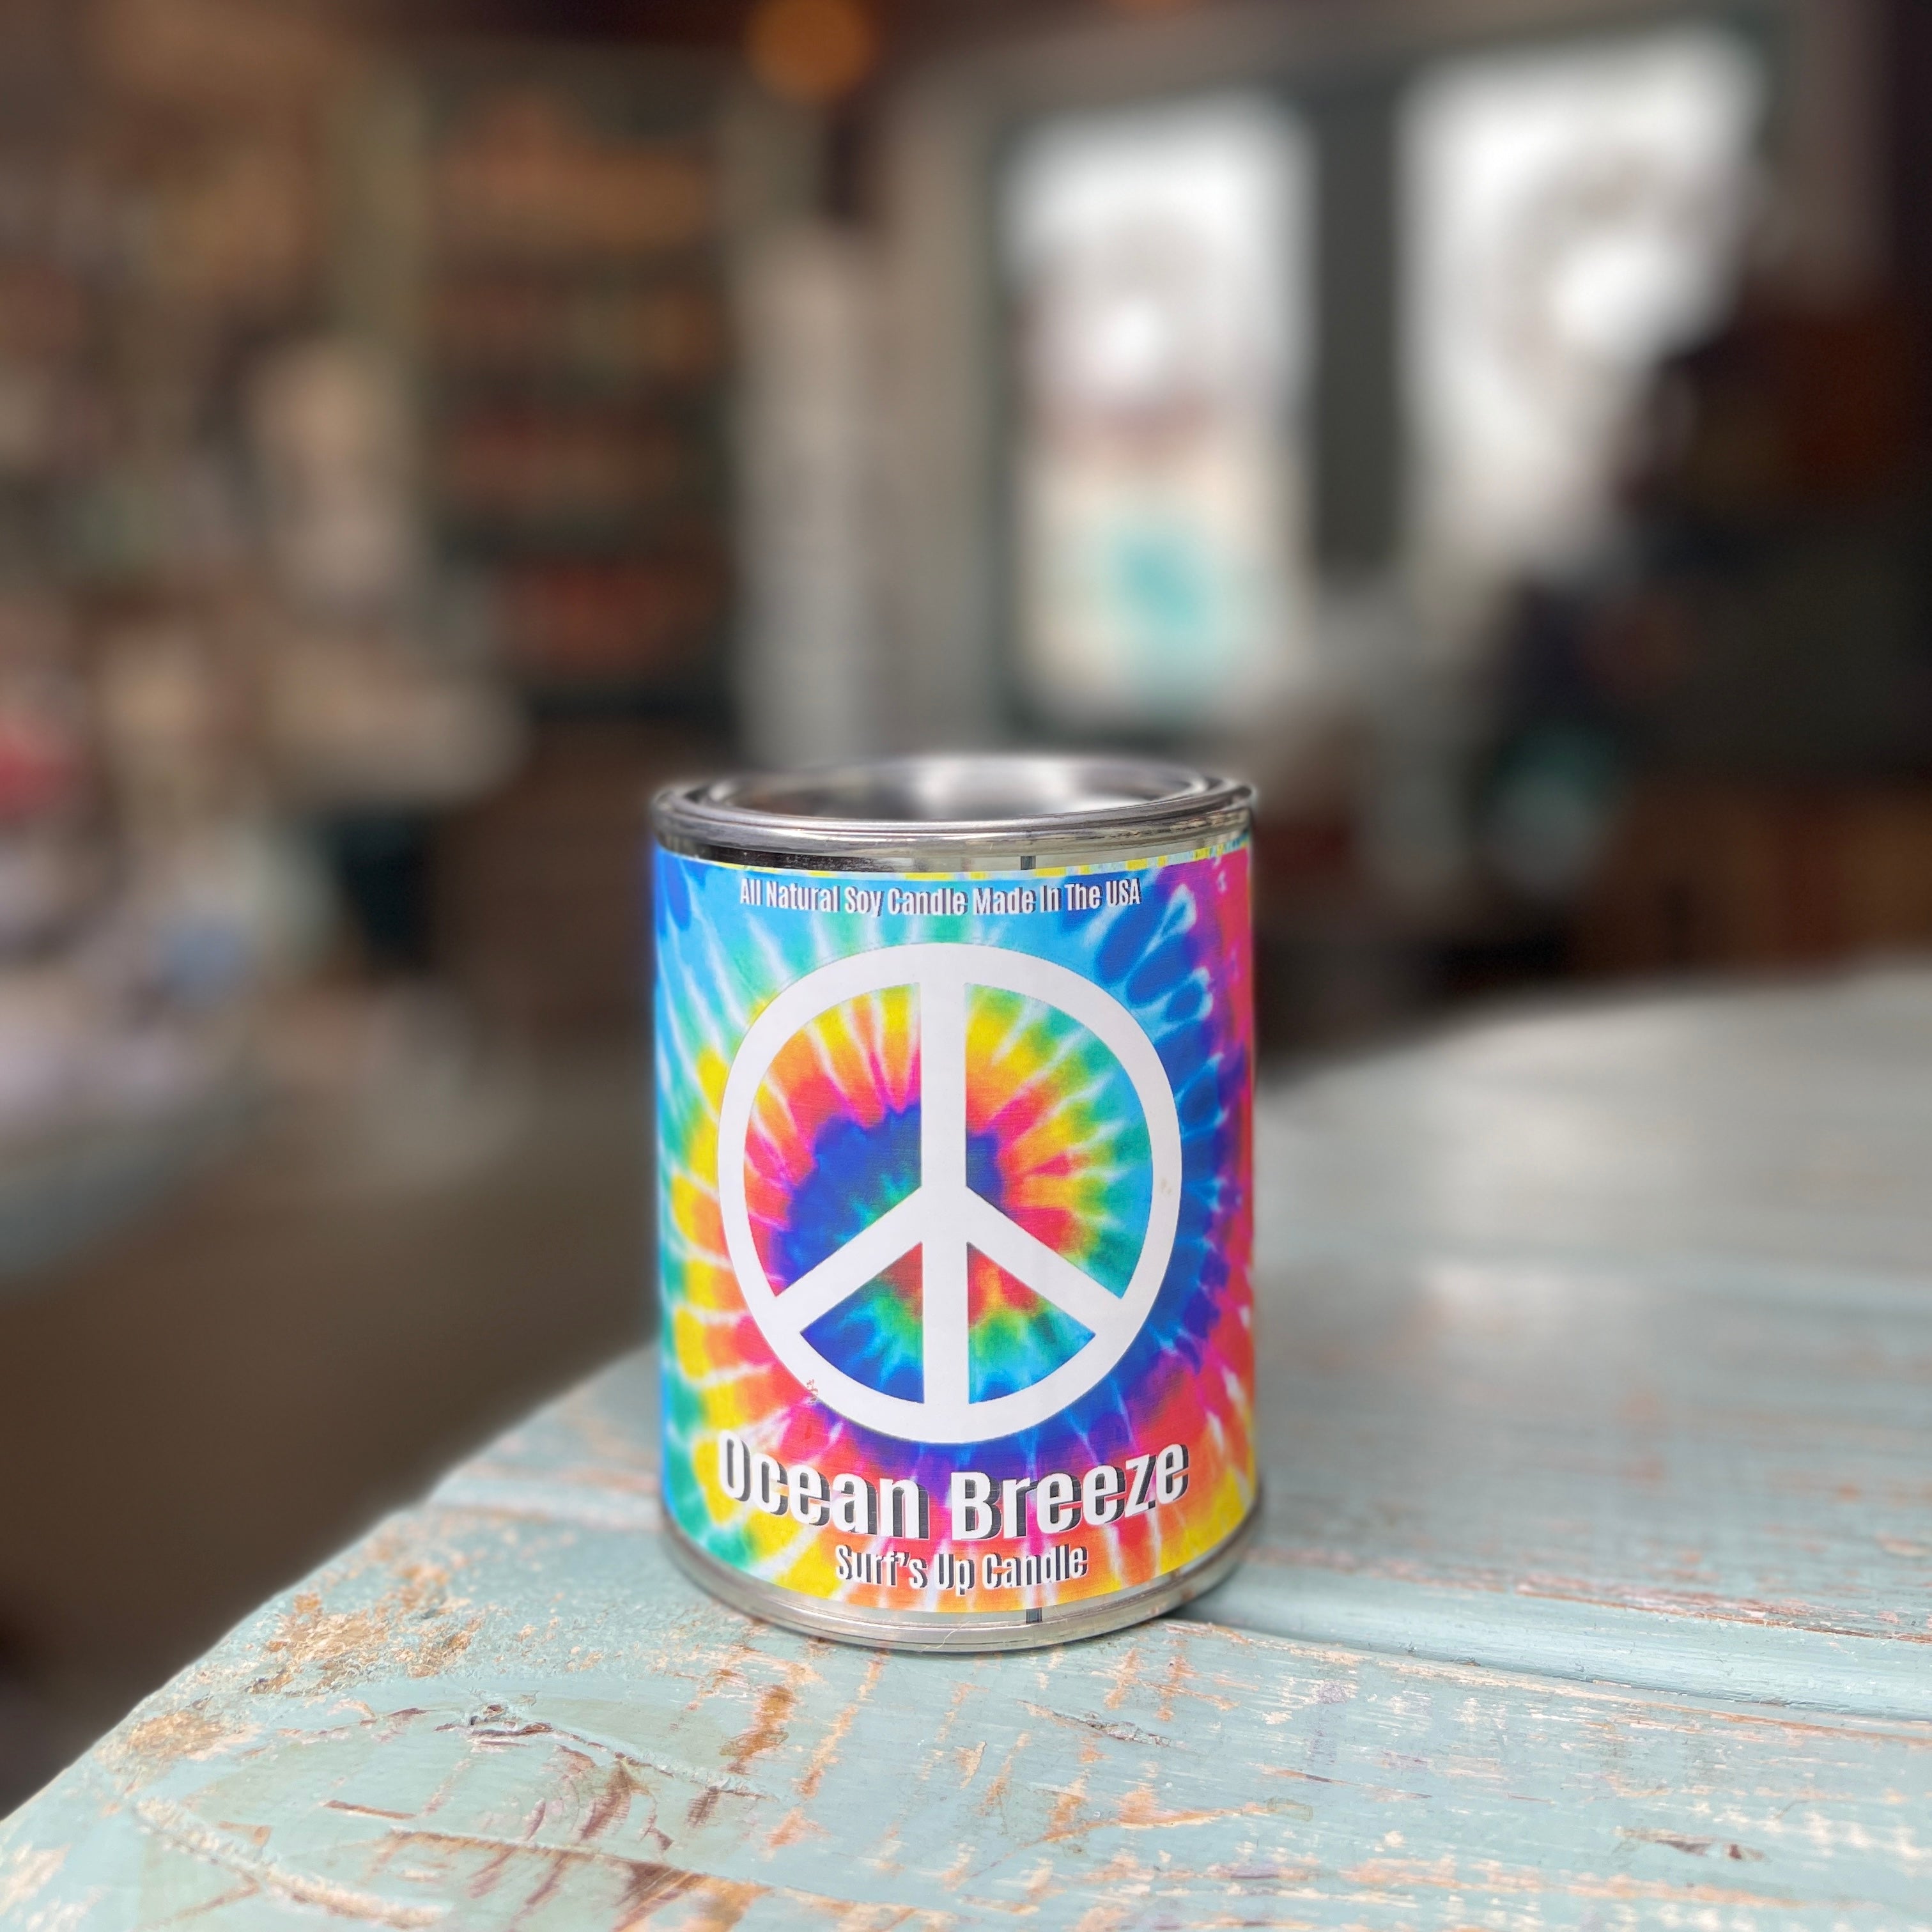 Ocean Breeze Tie Dye Peace Sign Paint Can Candle - Limited Edition